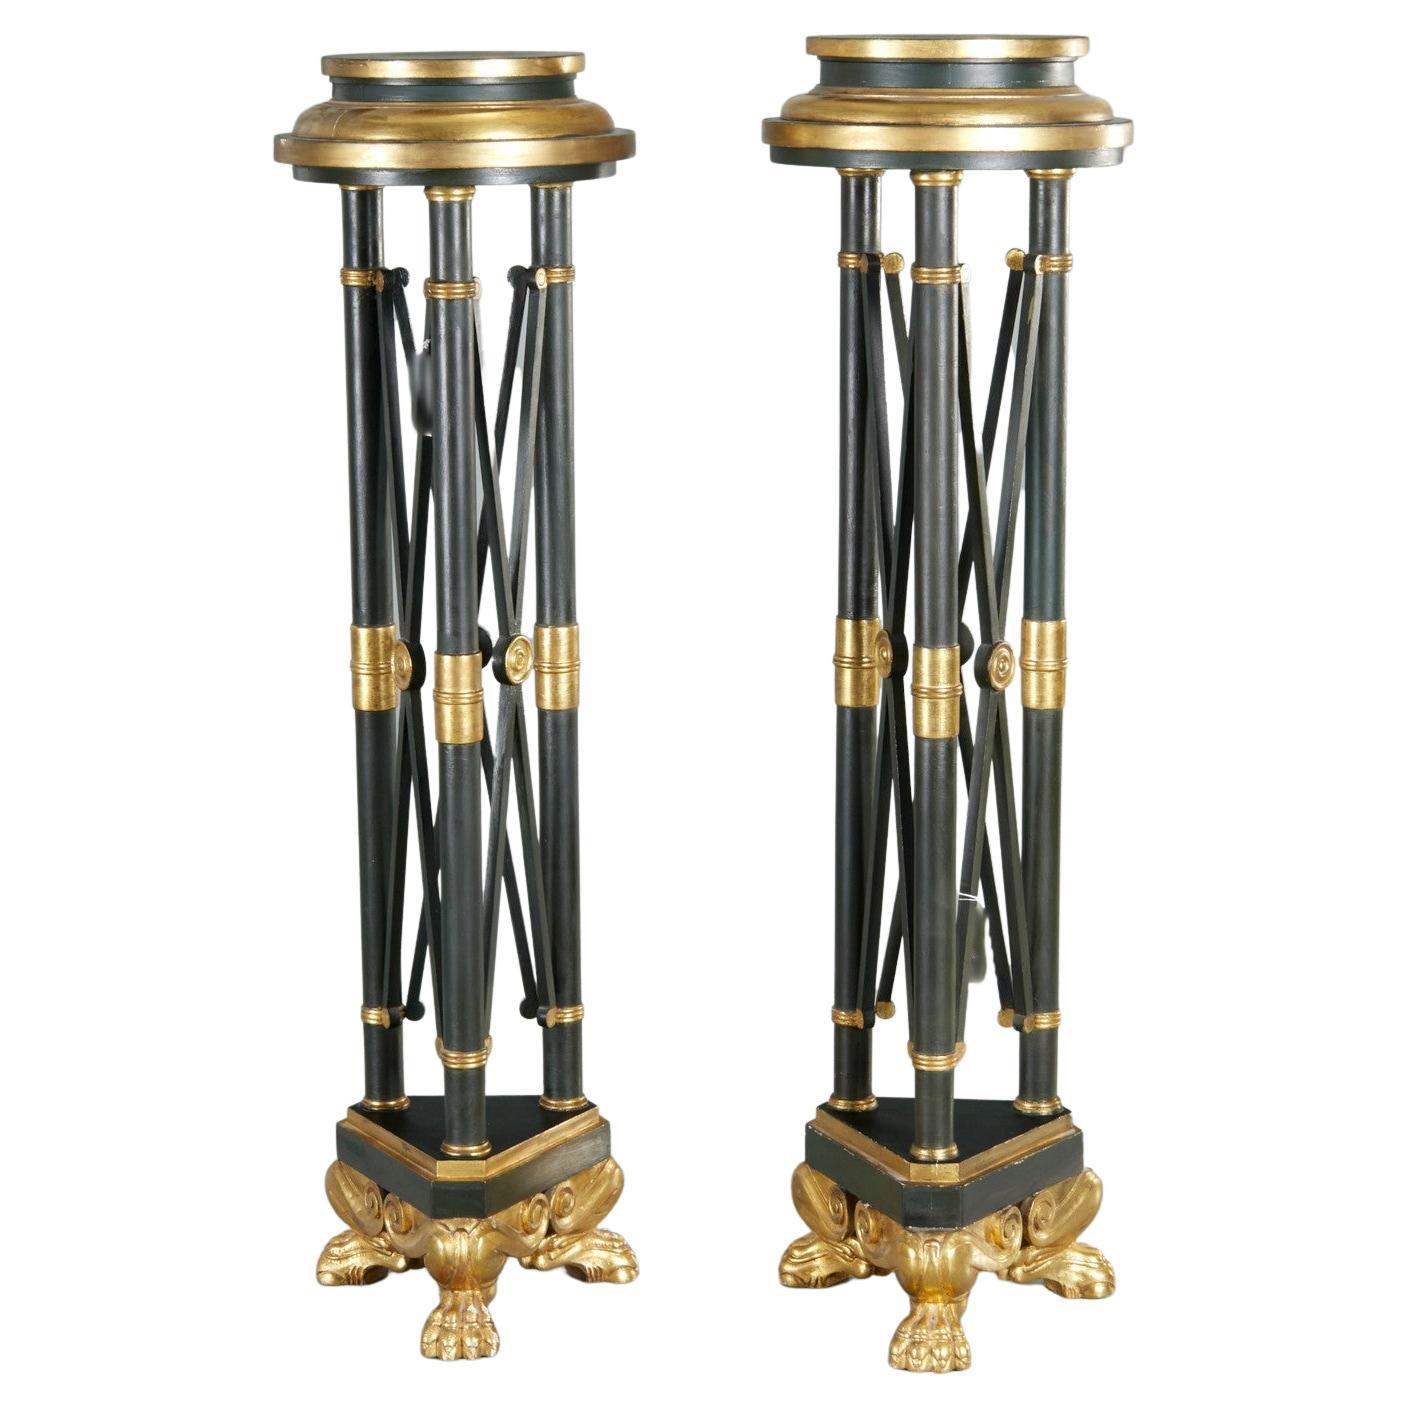 Vintage Empire Style Ebonised and Giltwood Torchiere Pedestals, a Pair For Sale